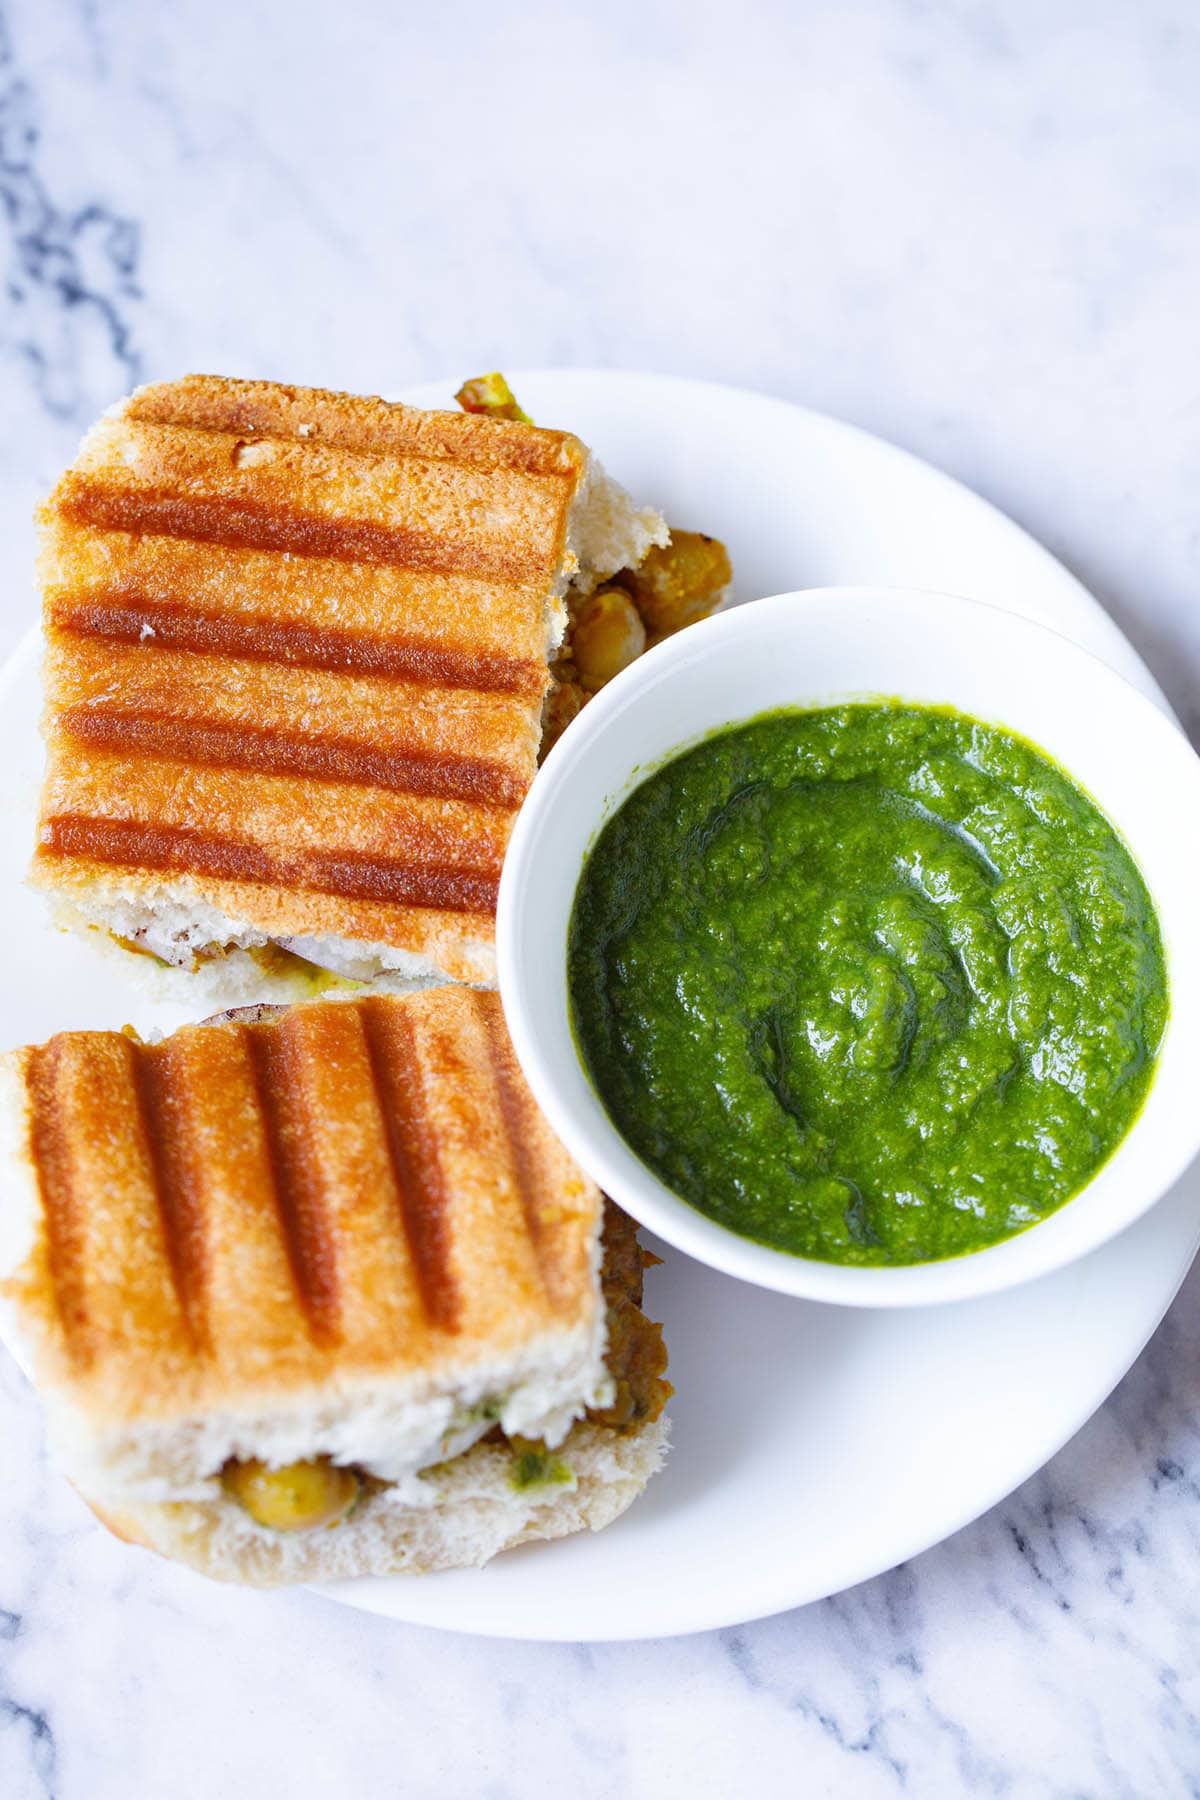 cilantro chutney in white bowl placed next to grilled sandwiches on a white plate